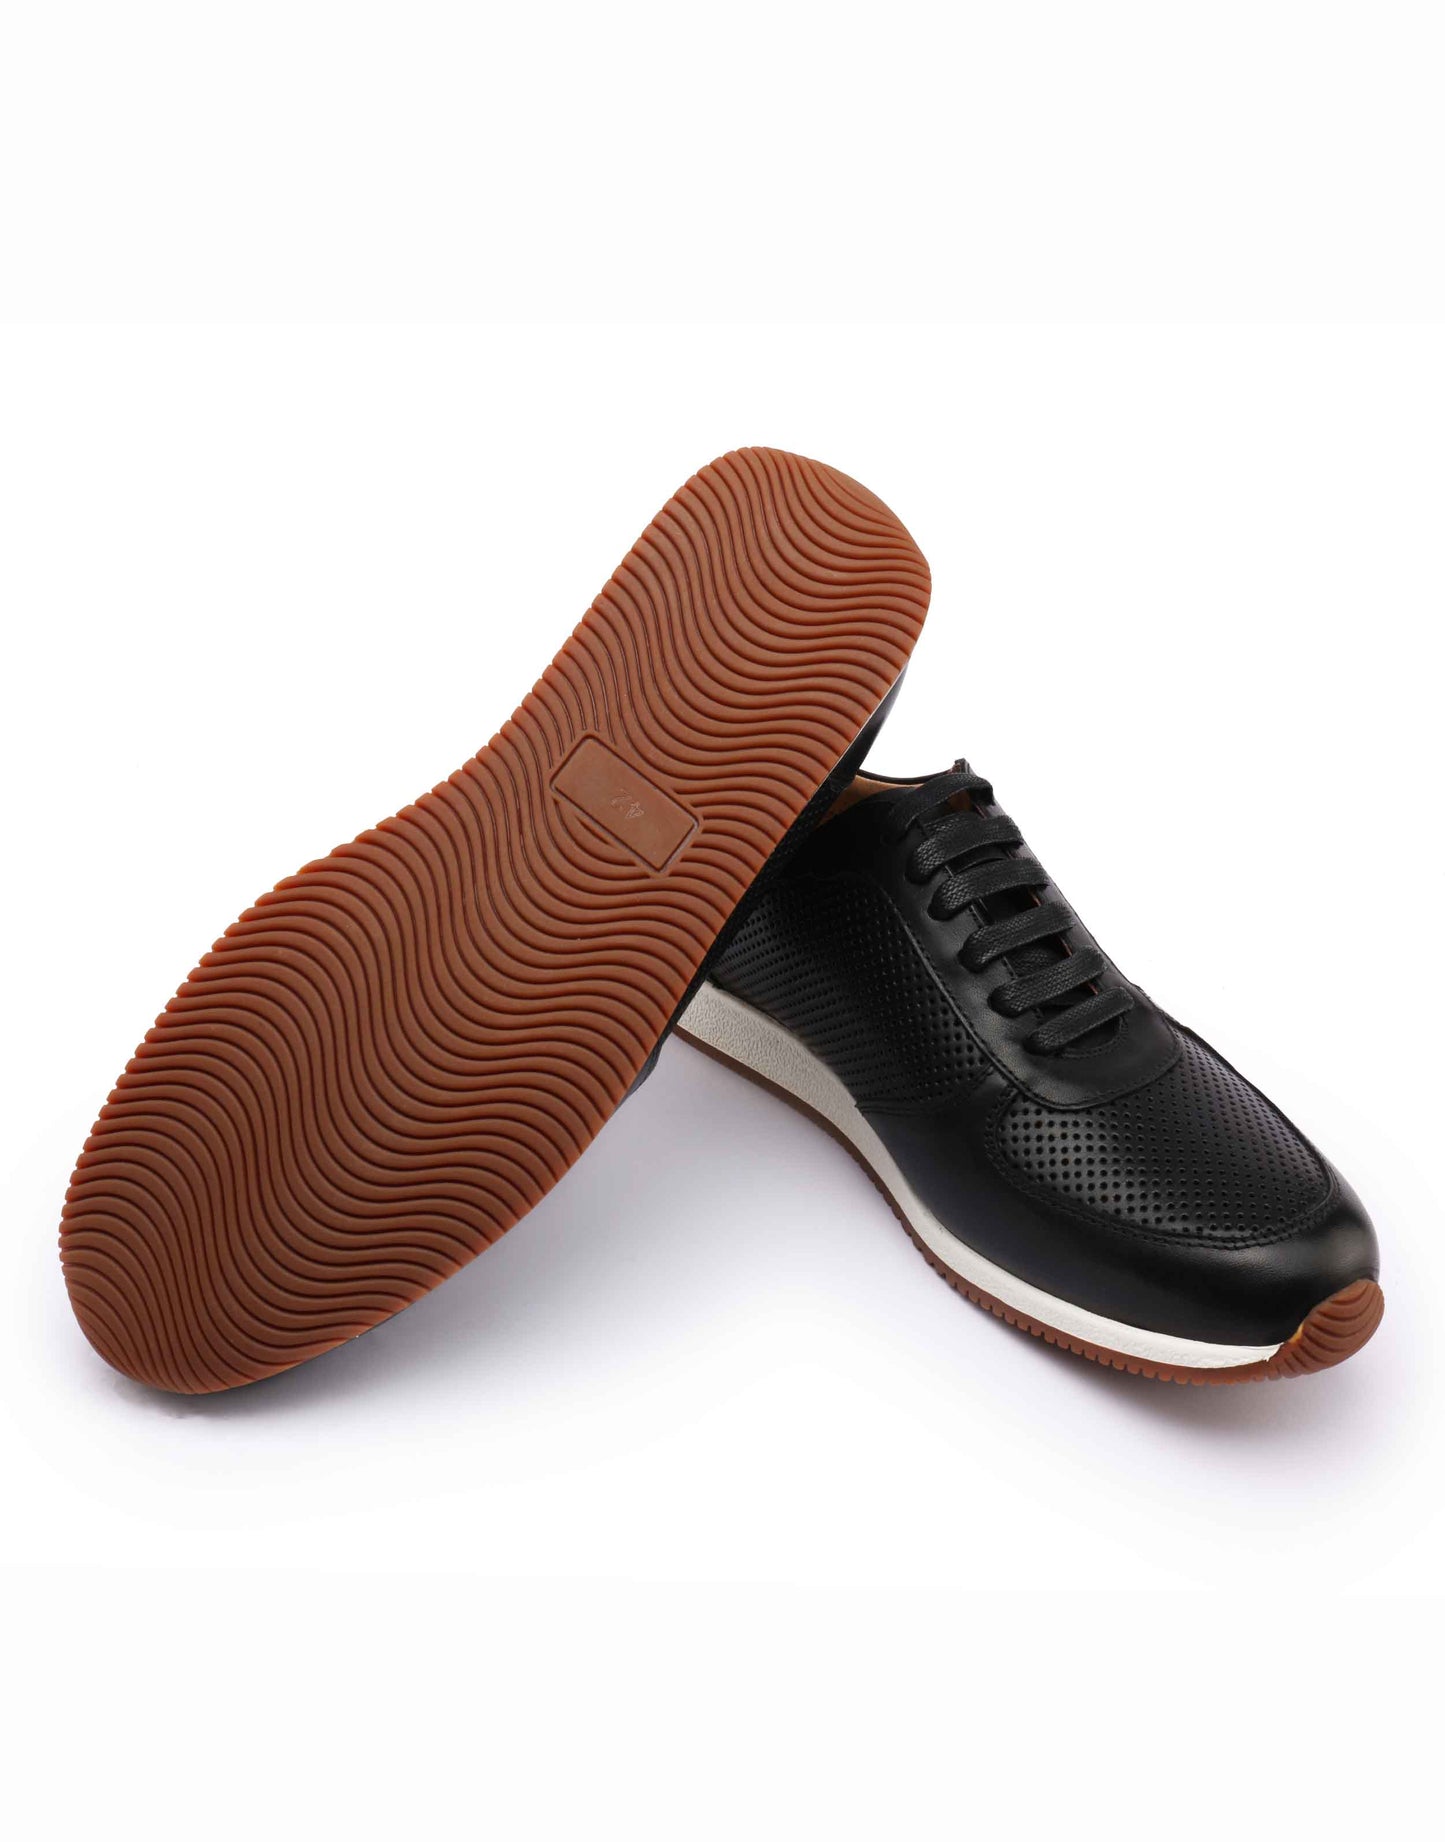 Perforated Black Leather Sneakers